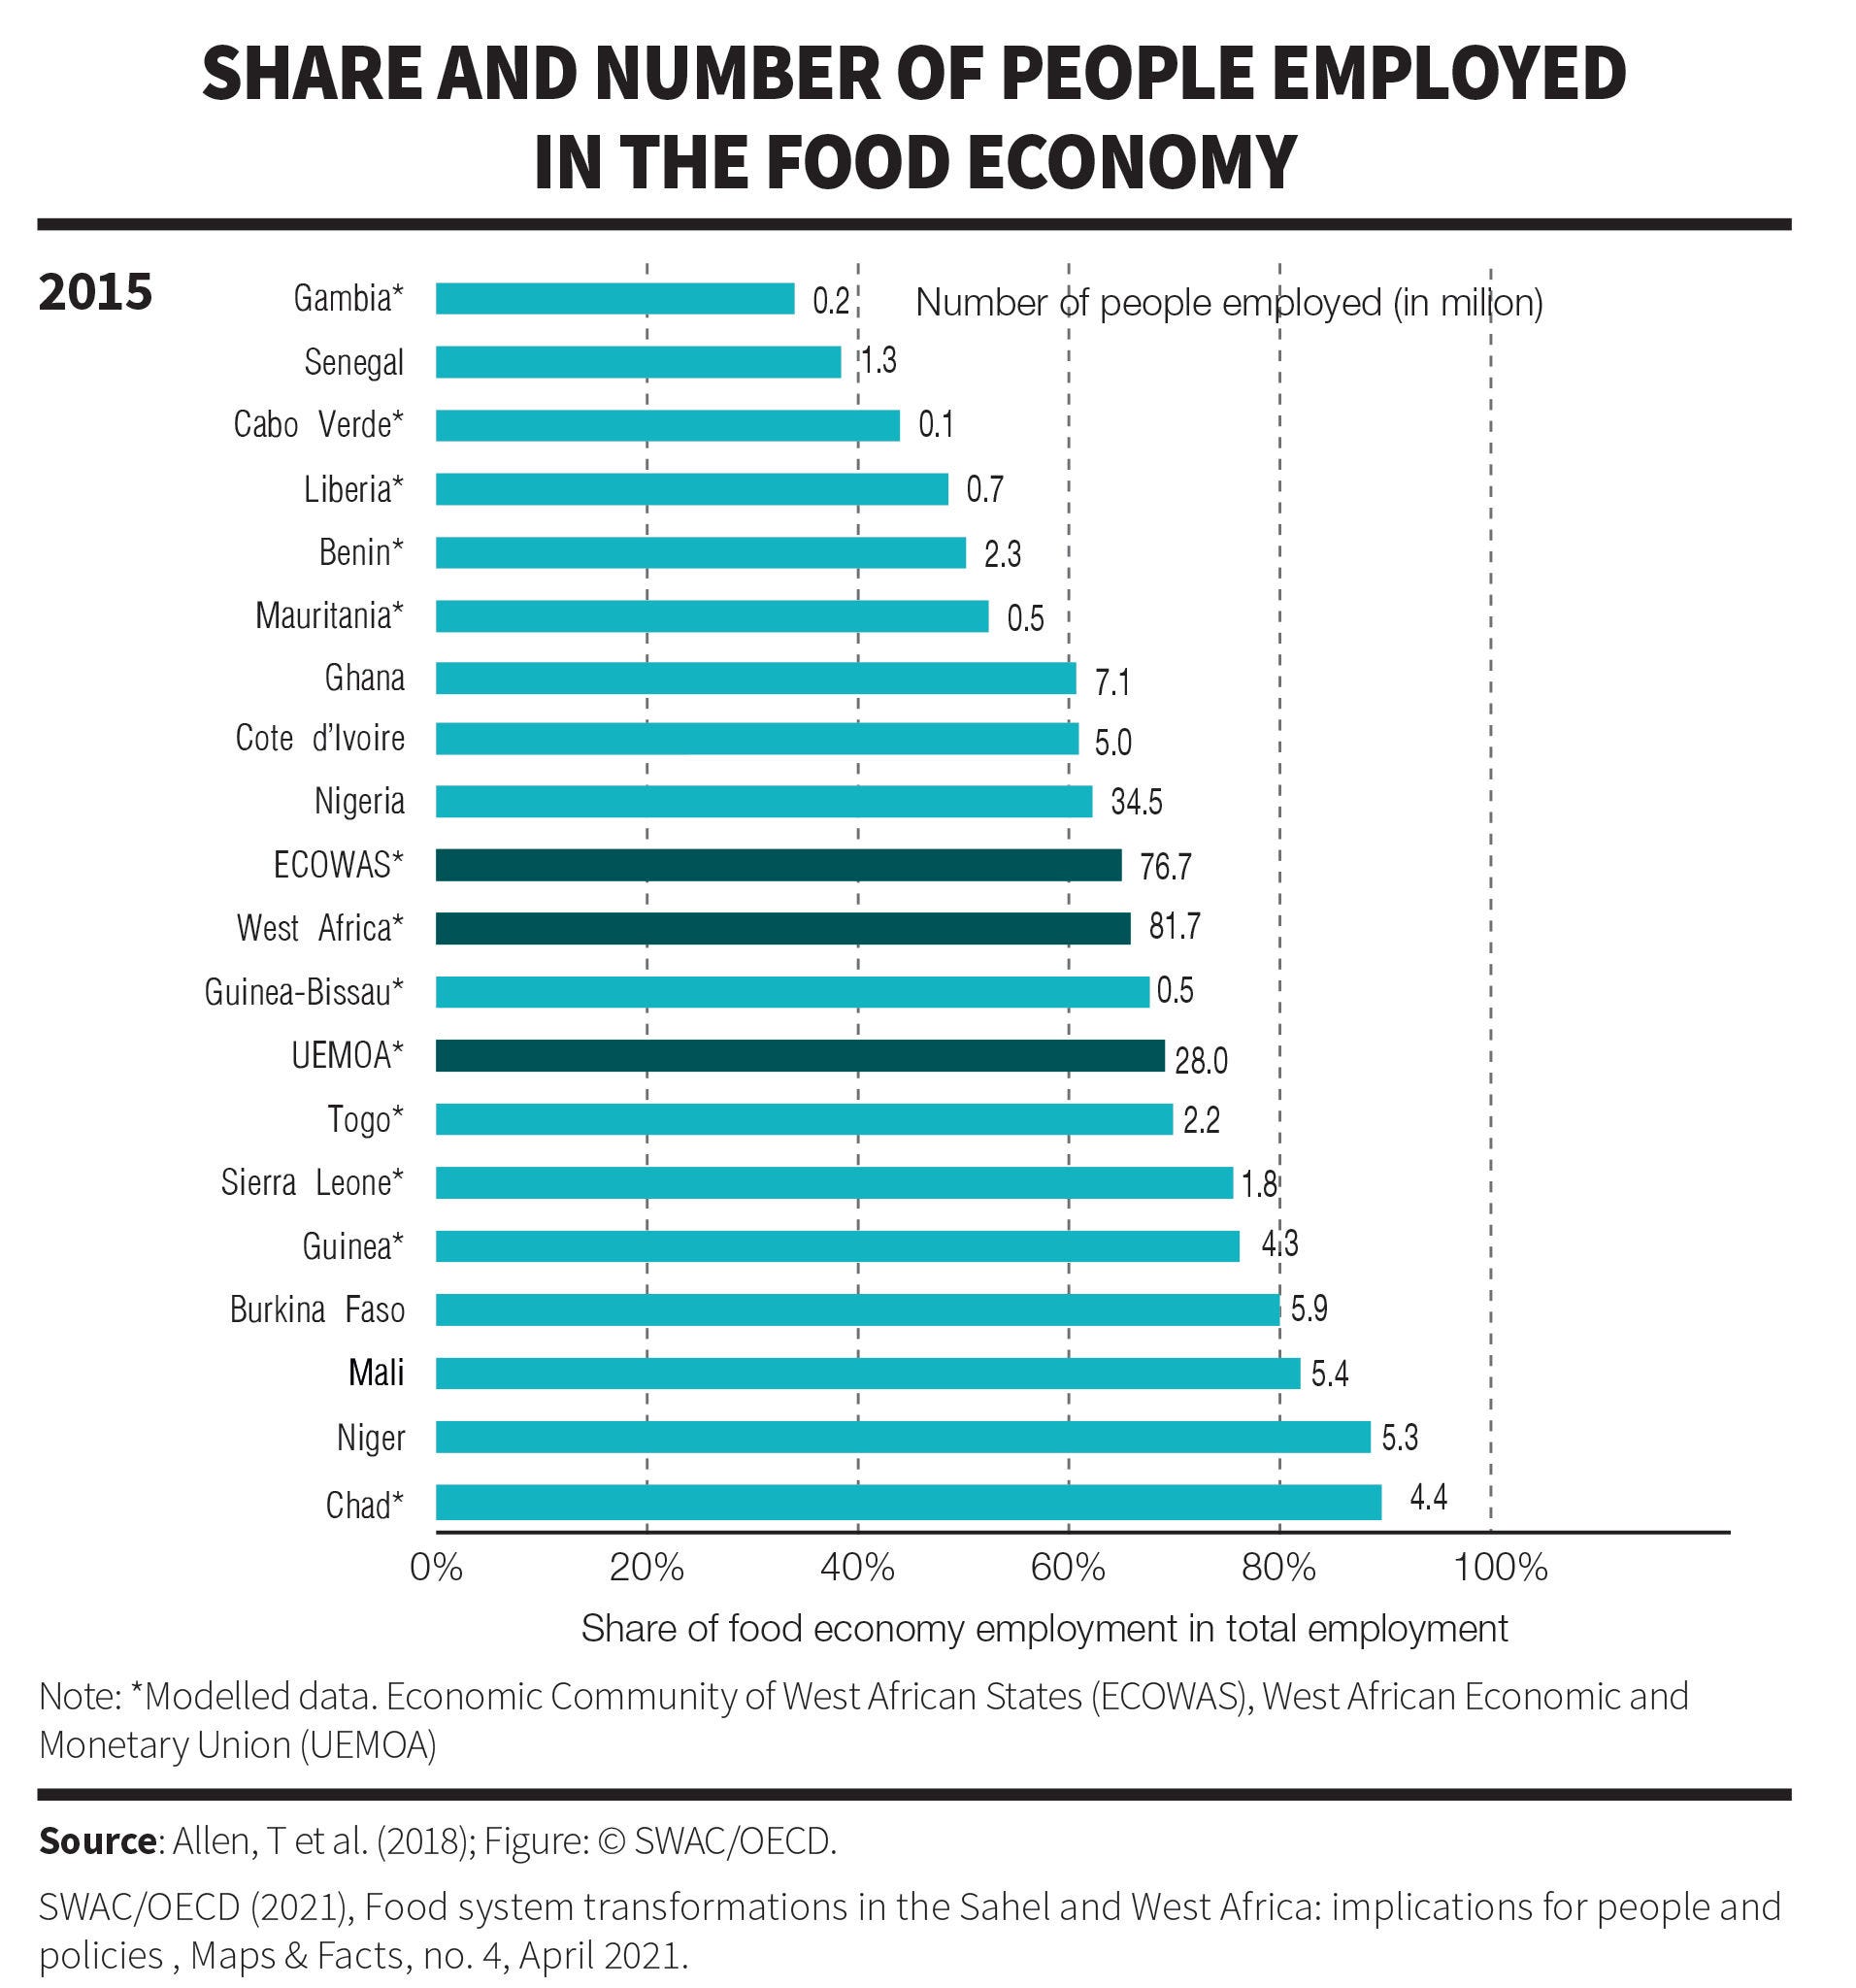 Share and number of people employed in the food economy